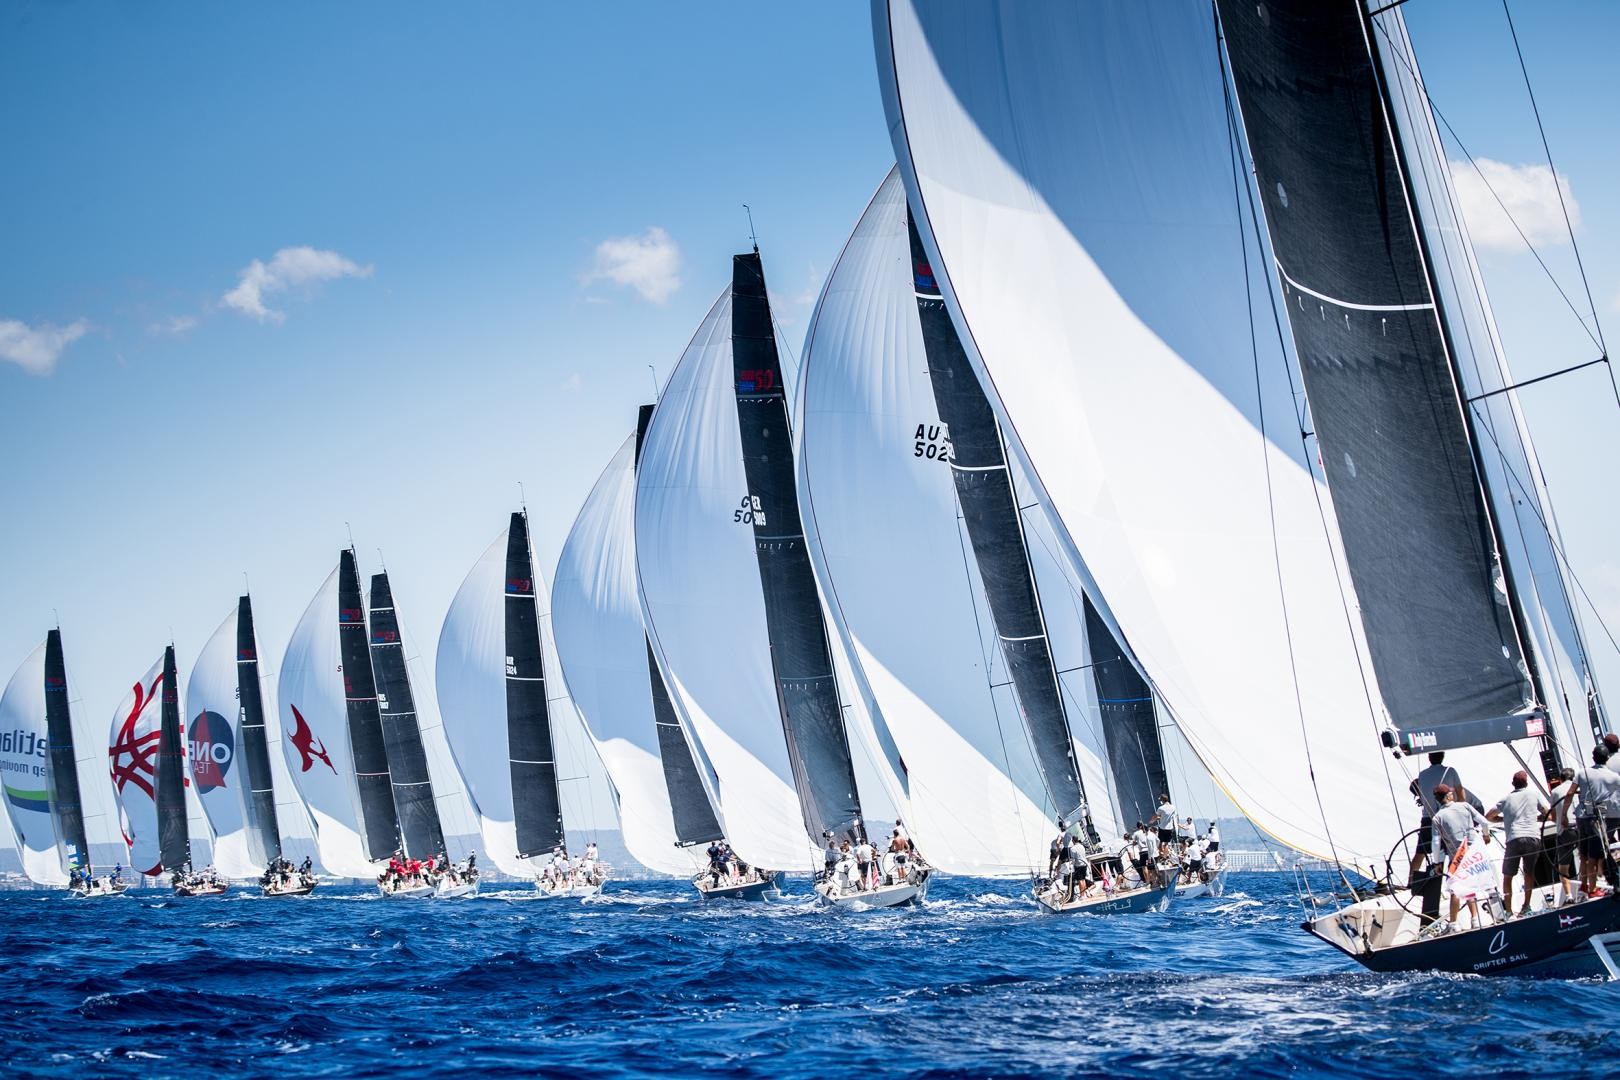 Fleet competing on the Bay of Palma in 2019